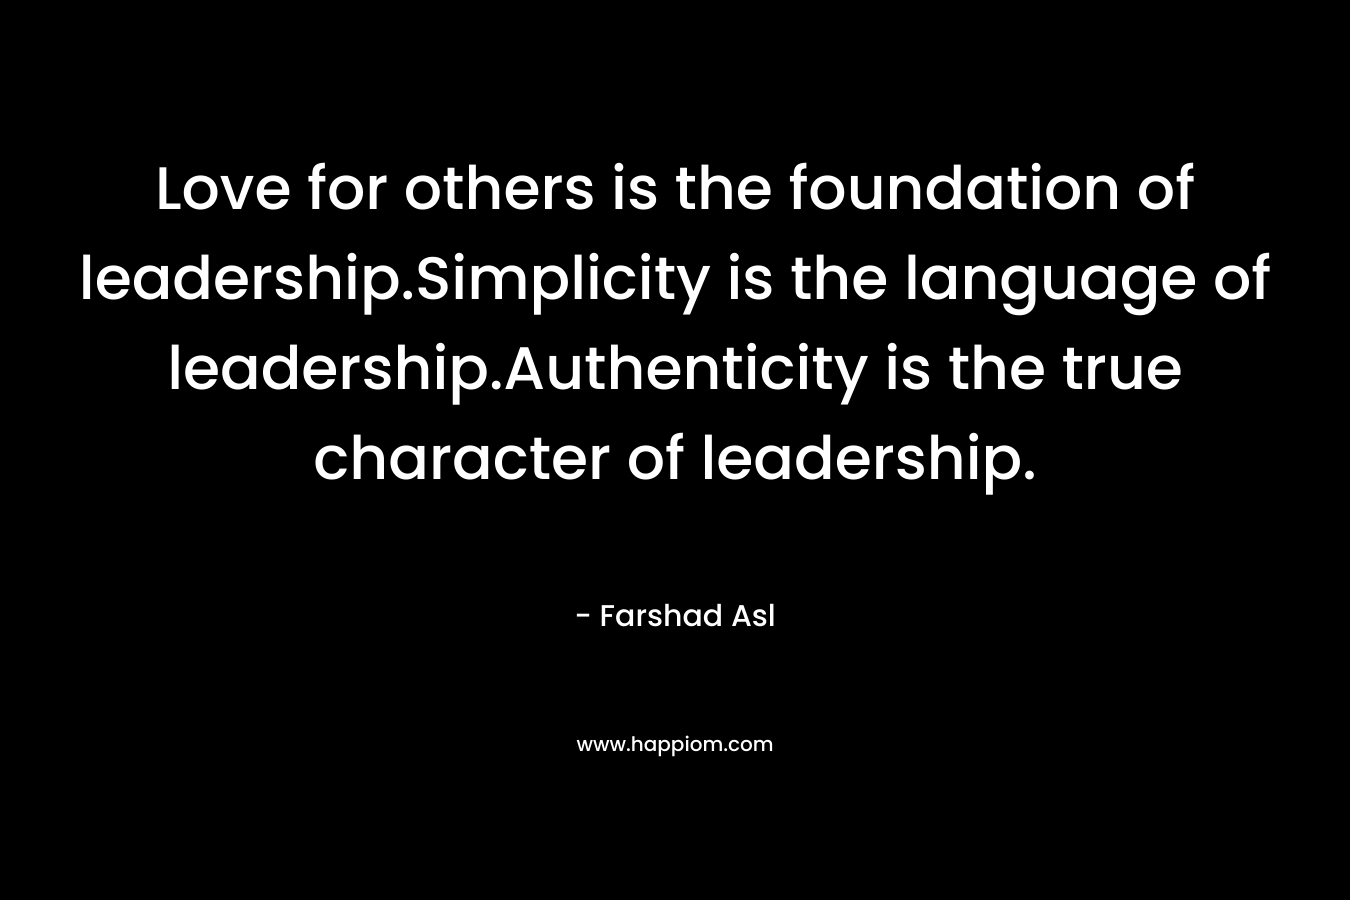 Love for others is the foundation of leadership.Simplicity is the language of leadership.Authenticity is the true character of leadership.